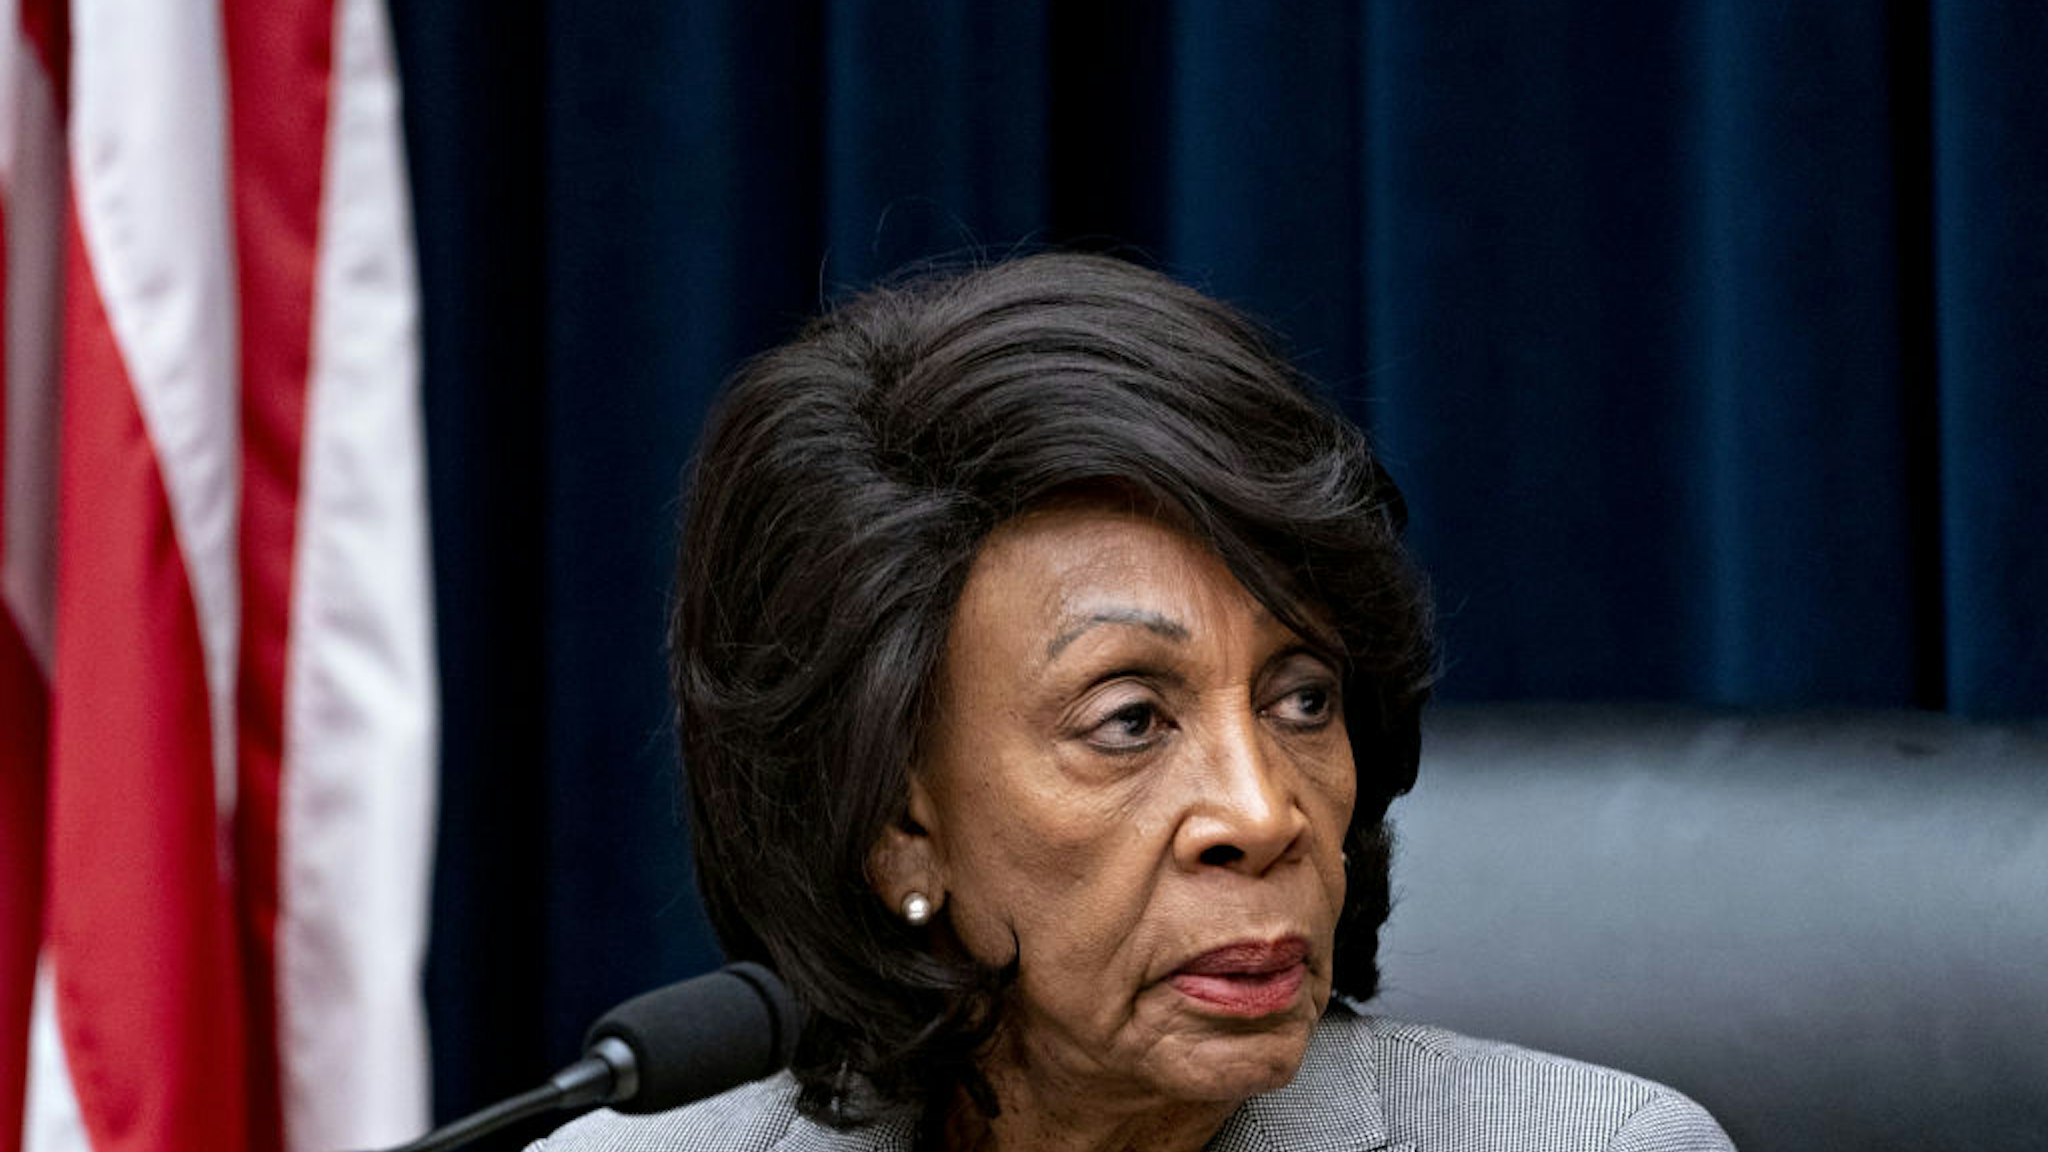 Representative Maxine Waters, a Democrat from California and chairwoman of the House Financial Services Committee, listens during a hearing with Steven Mnuchin, U.S. Treasury secretary, not pictured, in Washington, D.C., U.S., on Thursday, Dec. 5, 2019.